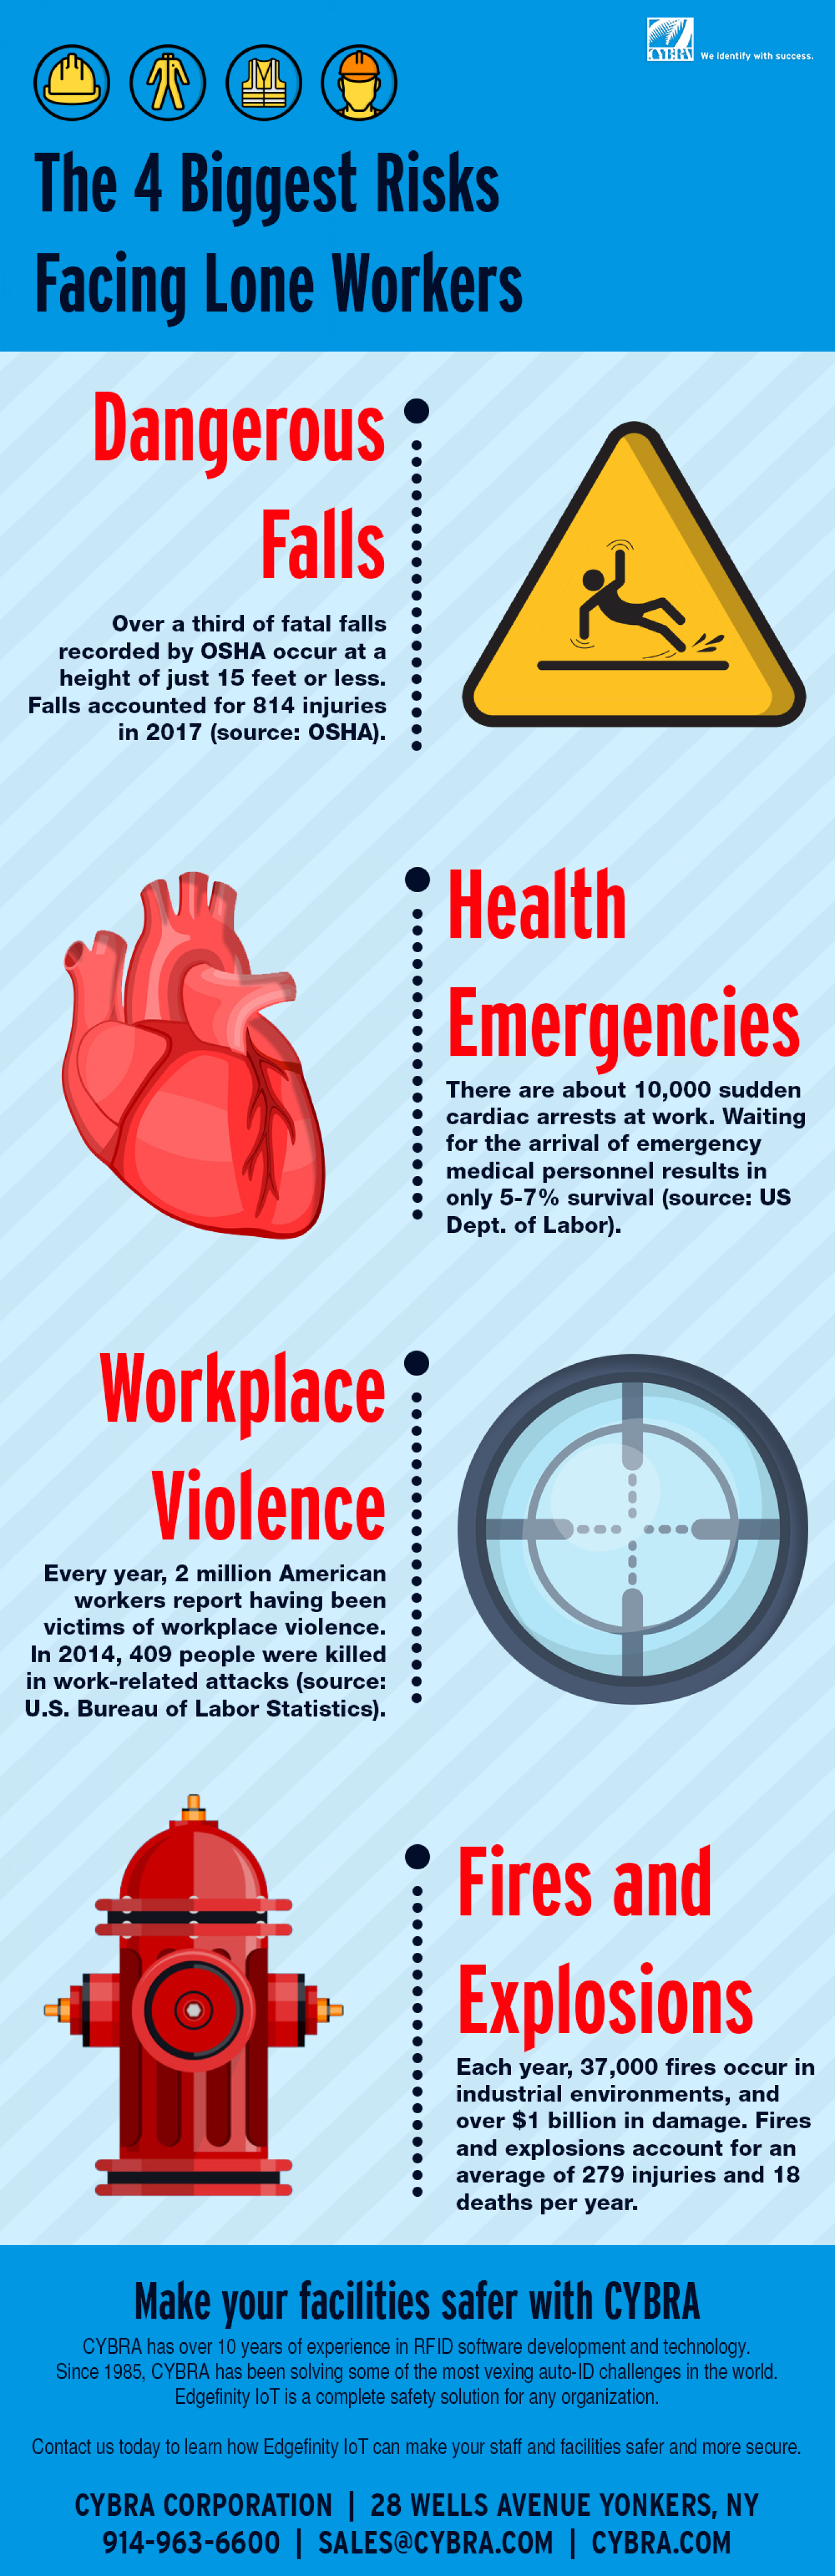 The 4 Biggest Risks Facing Lone Workers Infographic